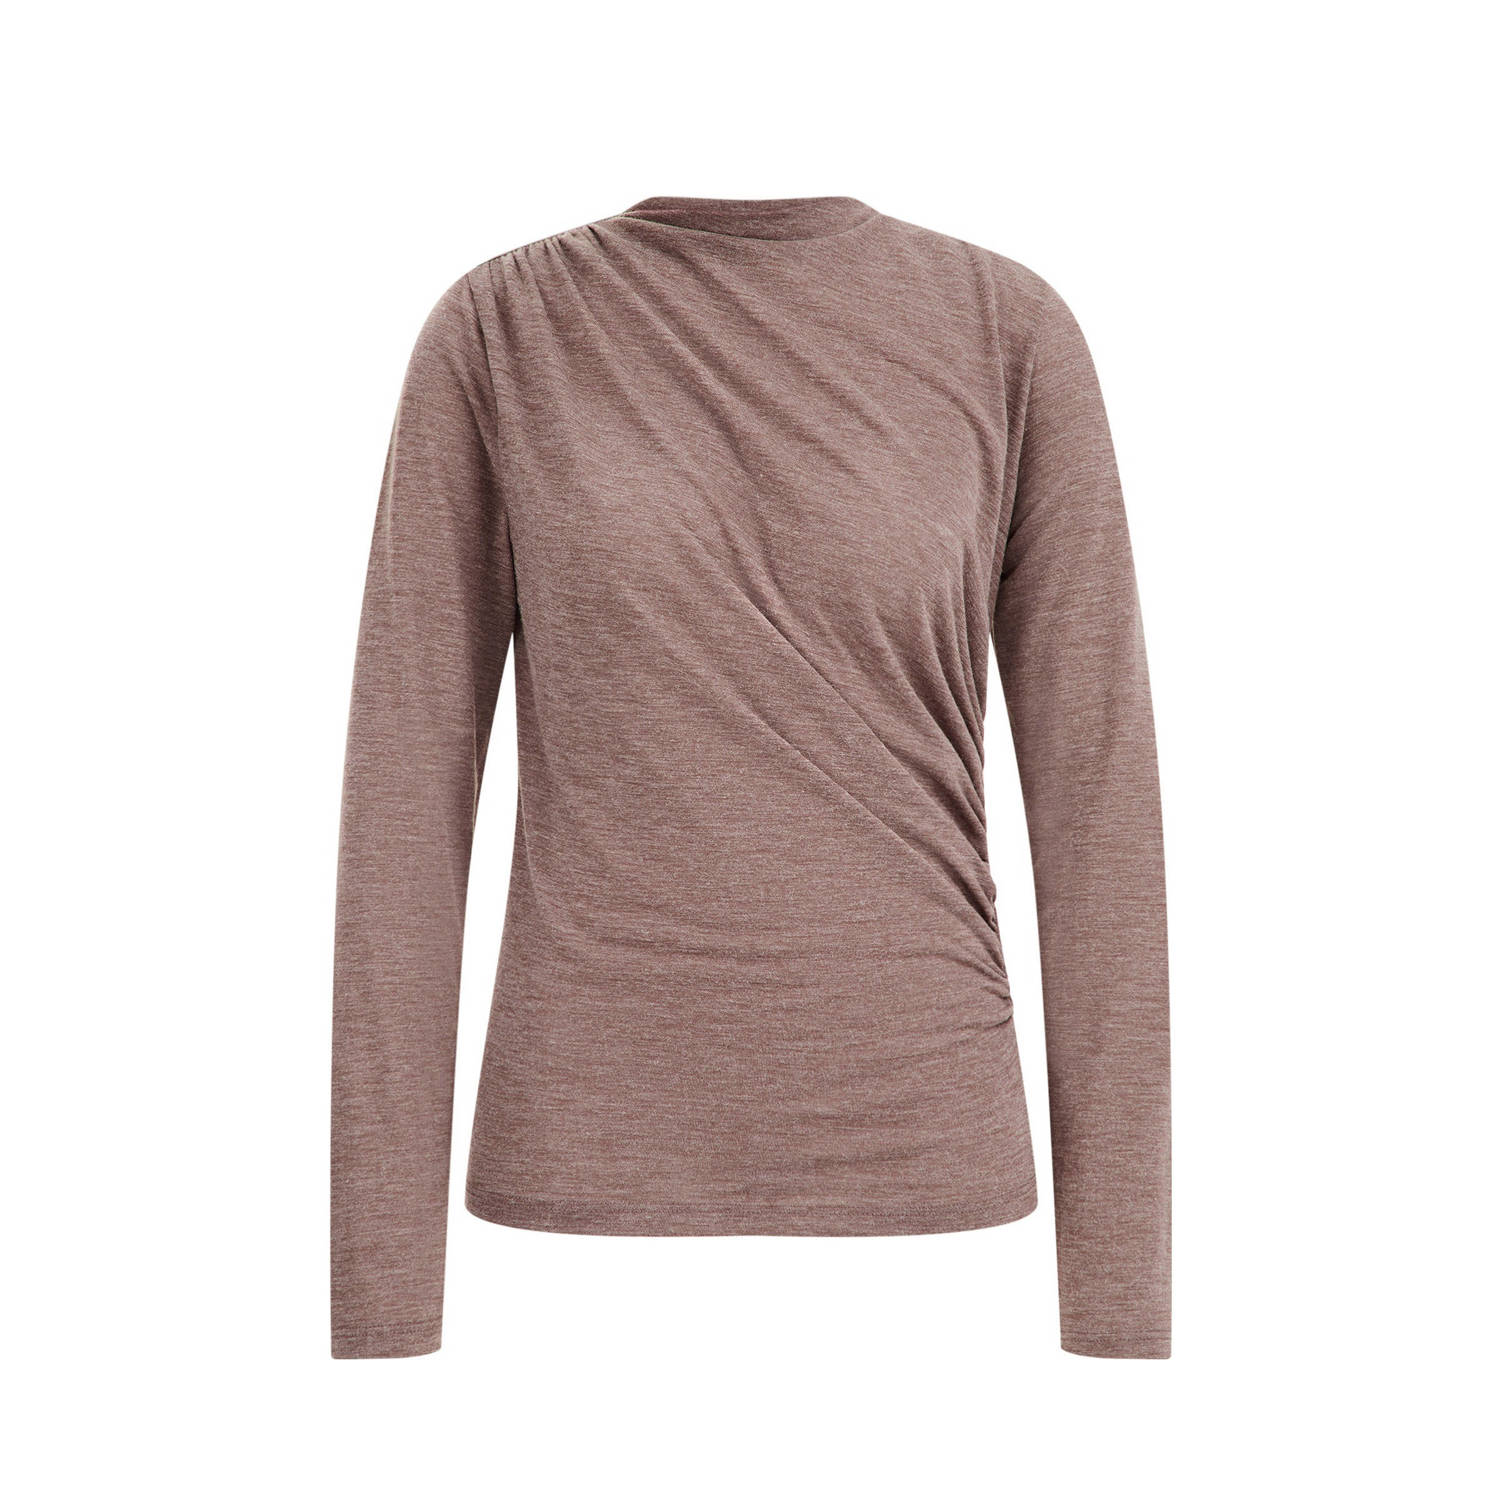 WE Fashion jersey top taupe